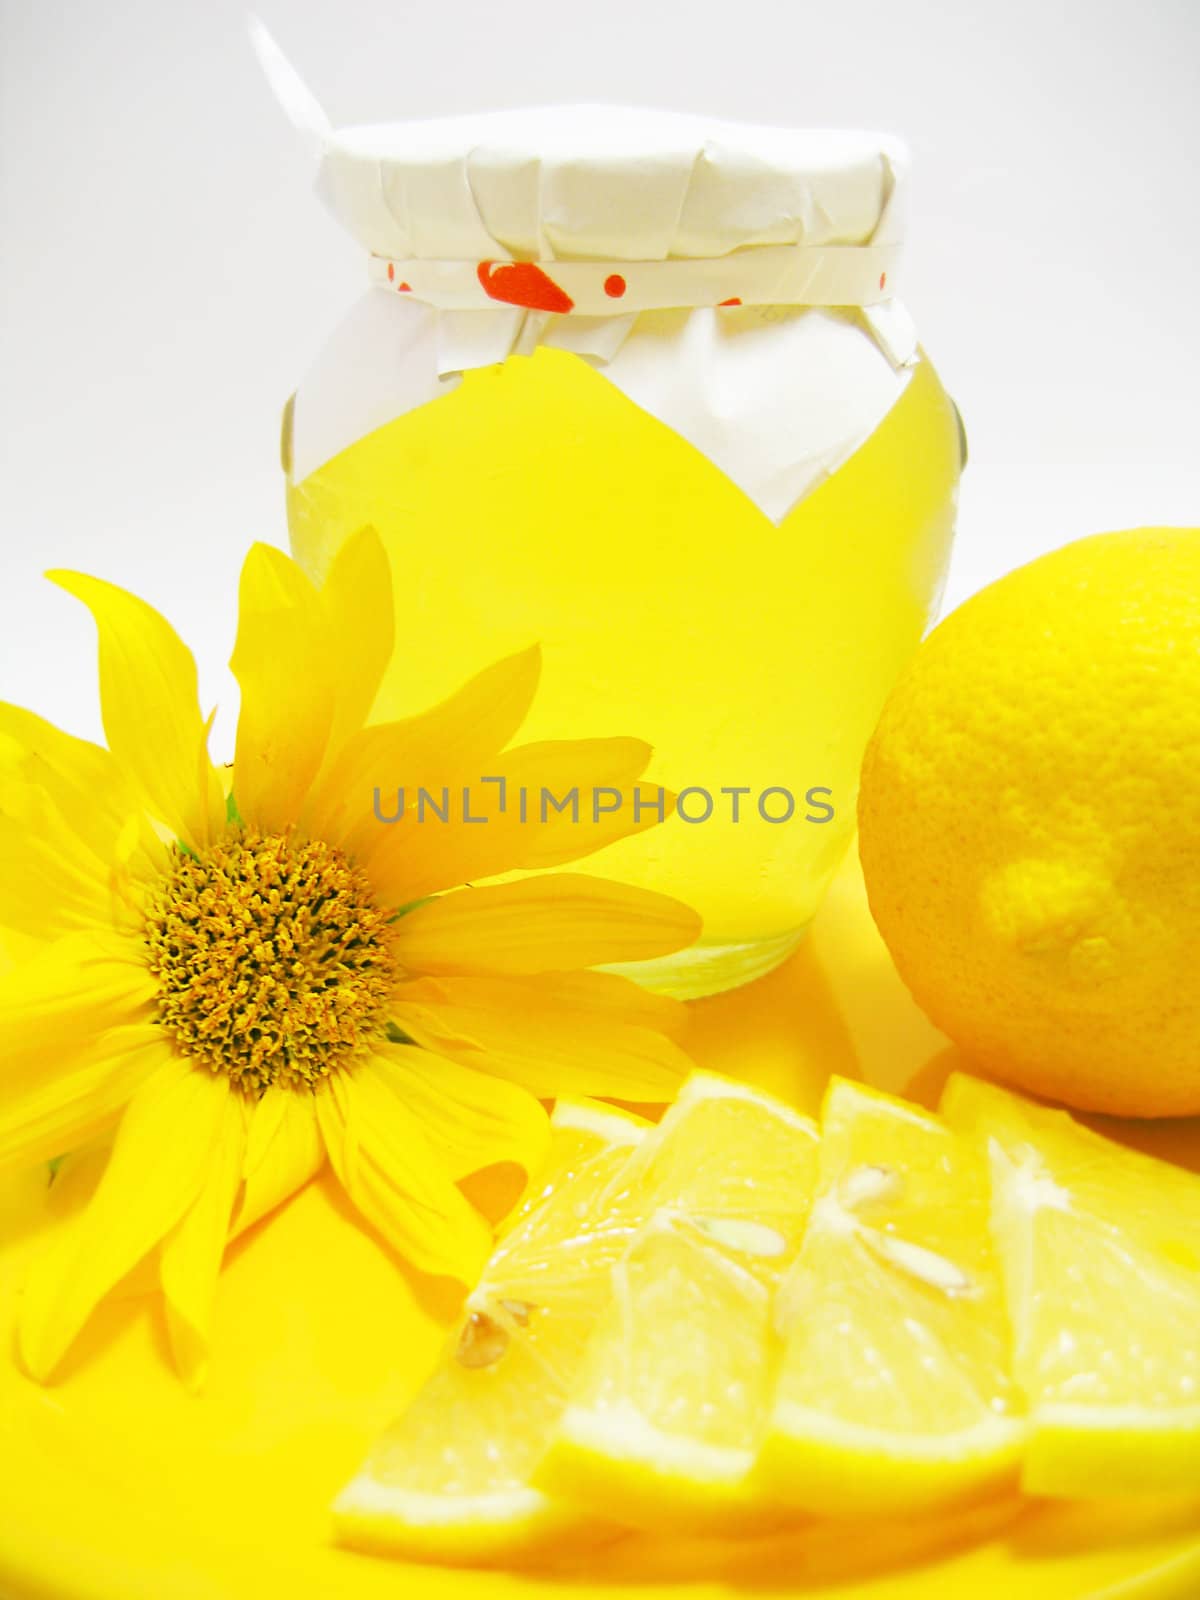 Jar of honey with lemon and yellow flower